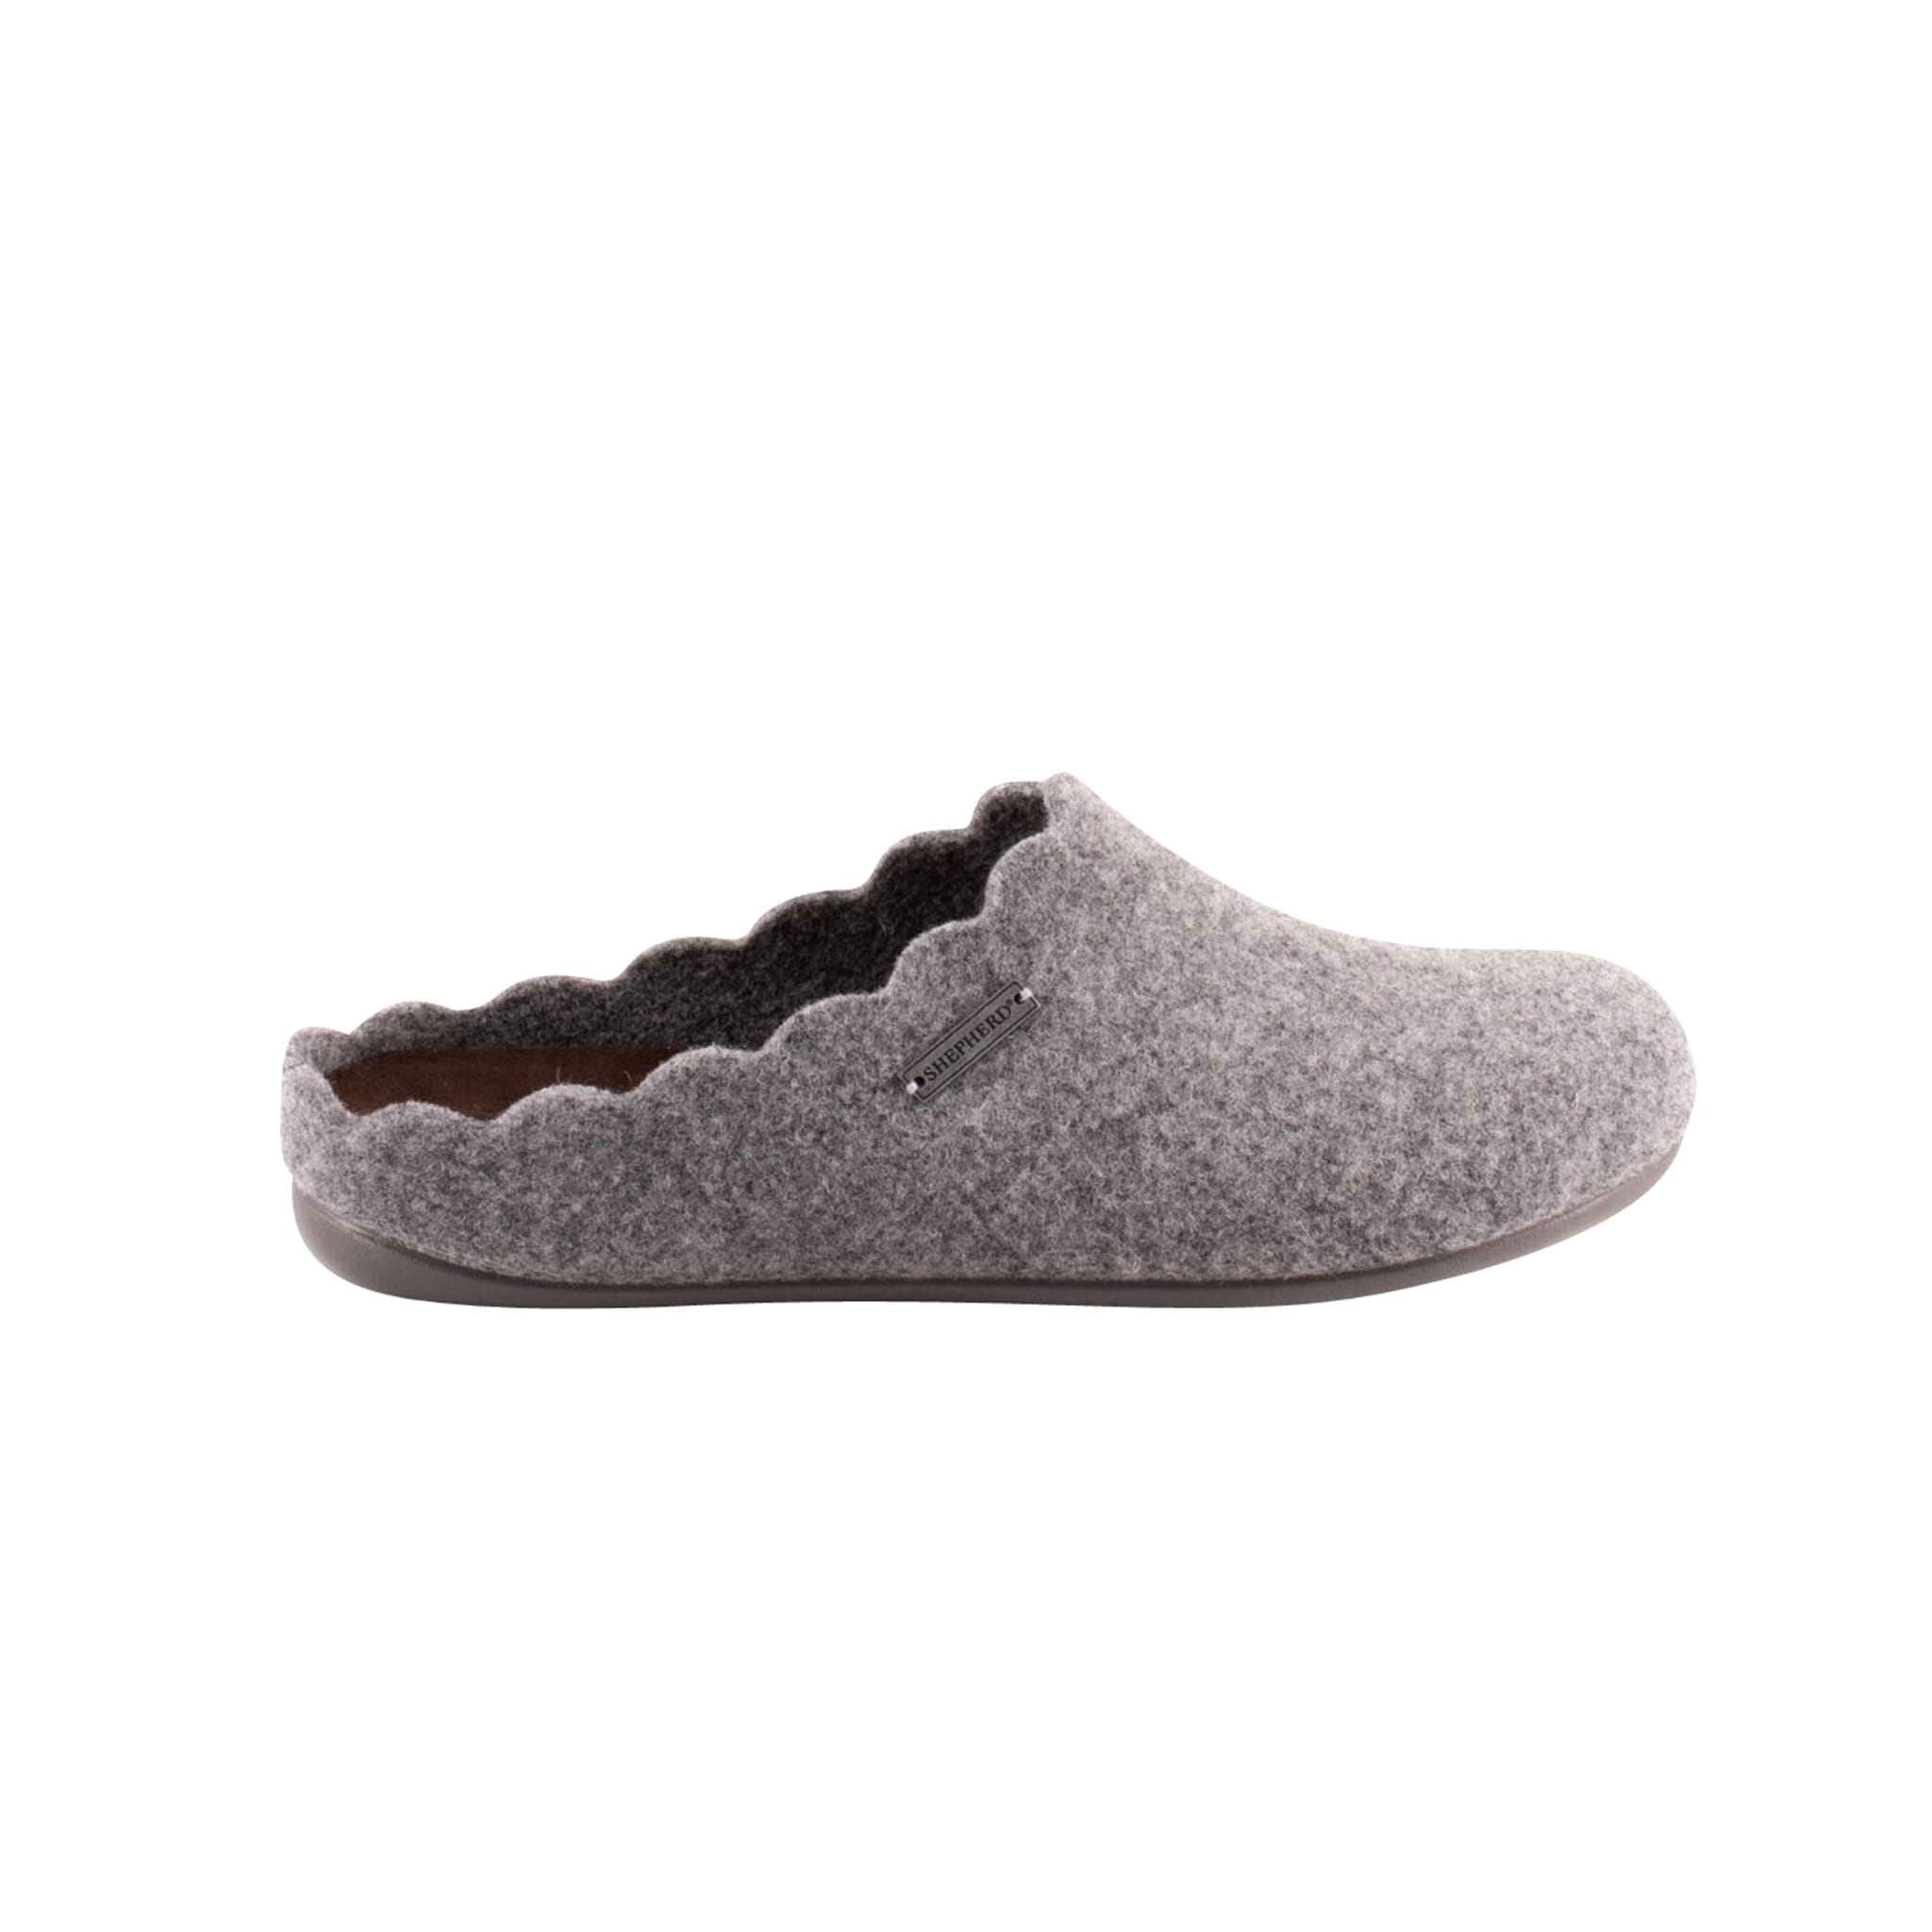 Shepherd Paulina. A pair of soft wool slippers with a decorative edging.